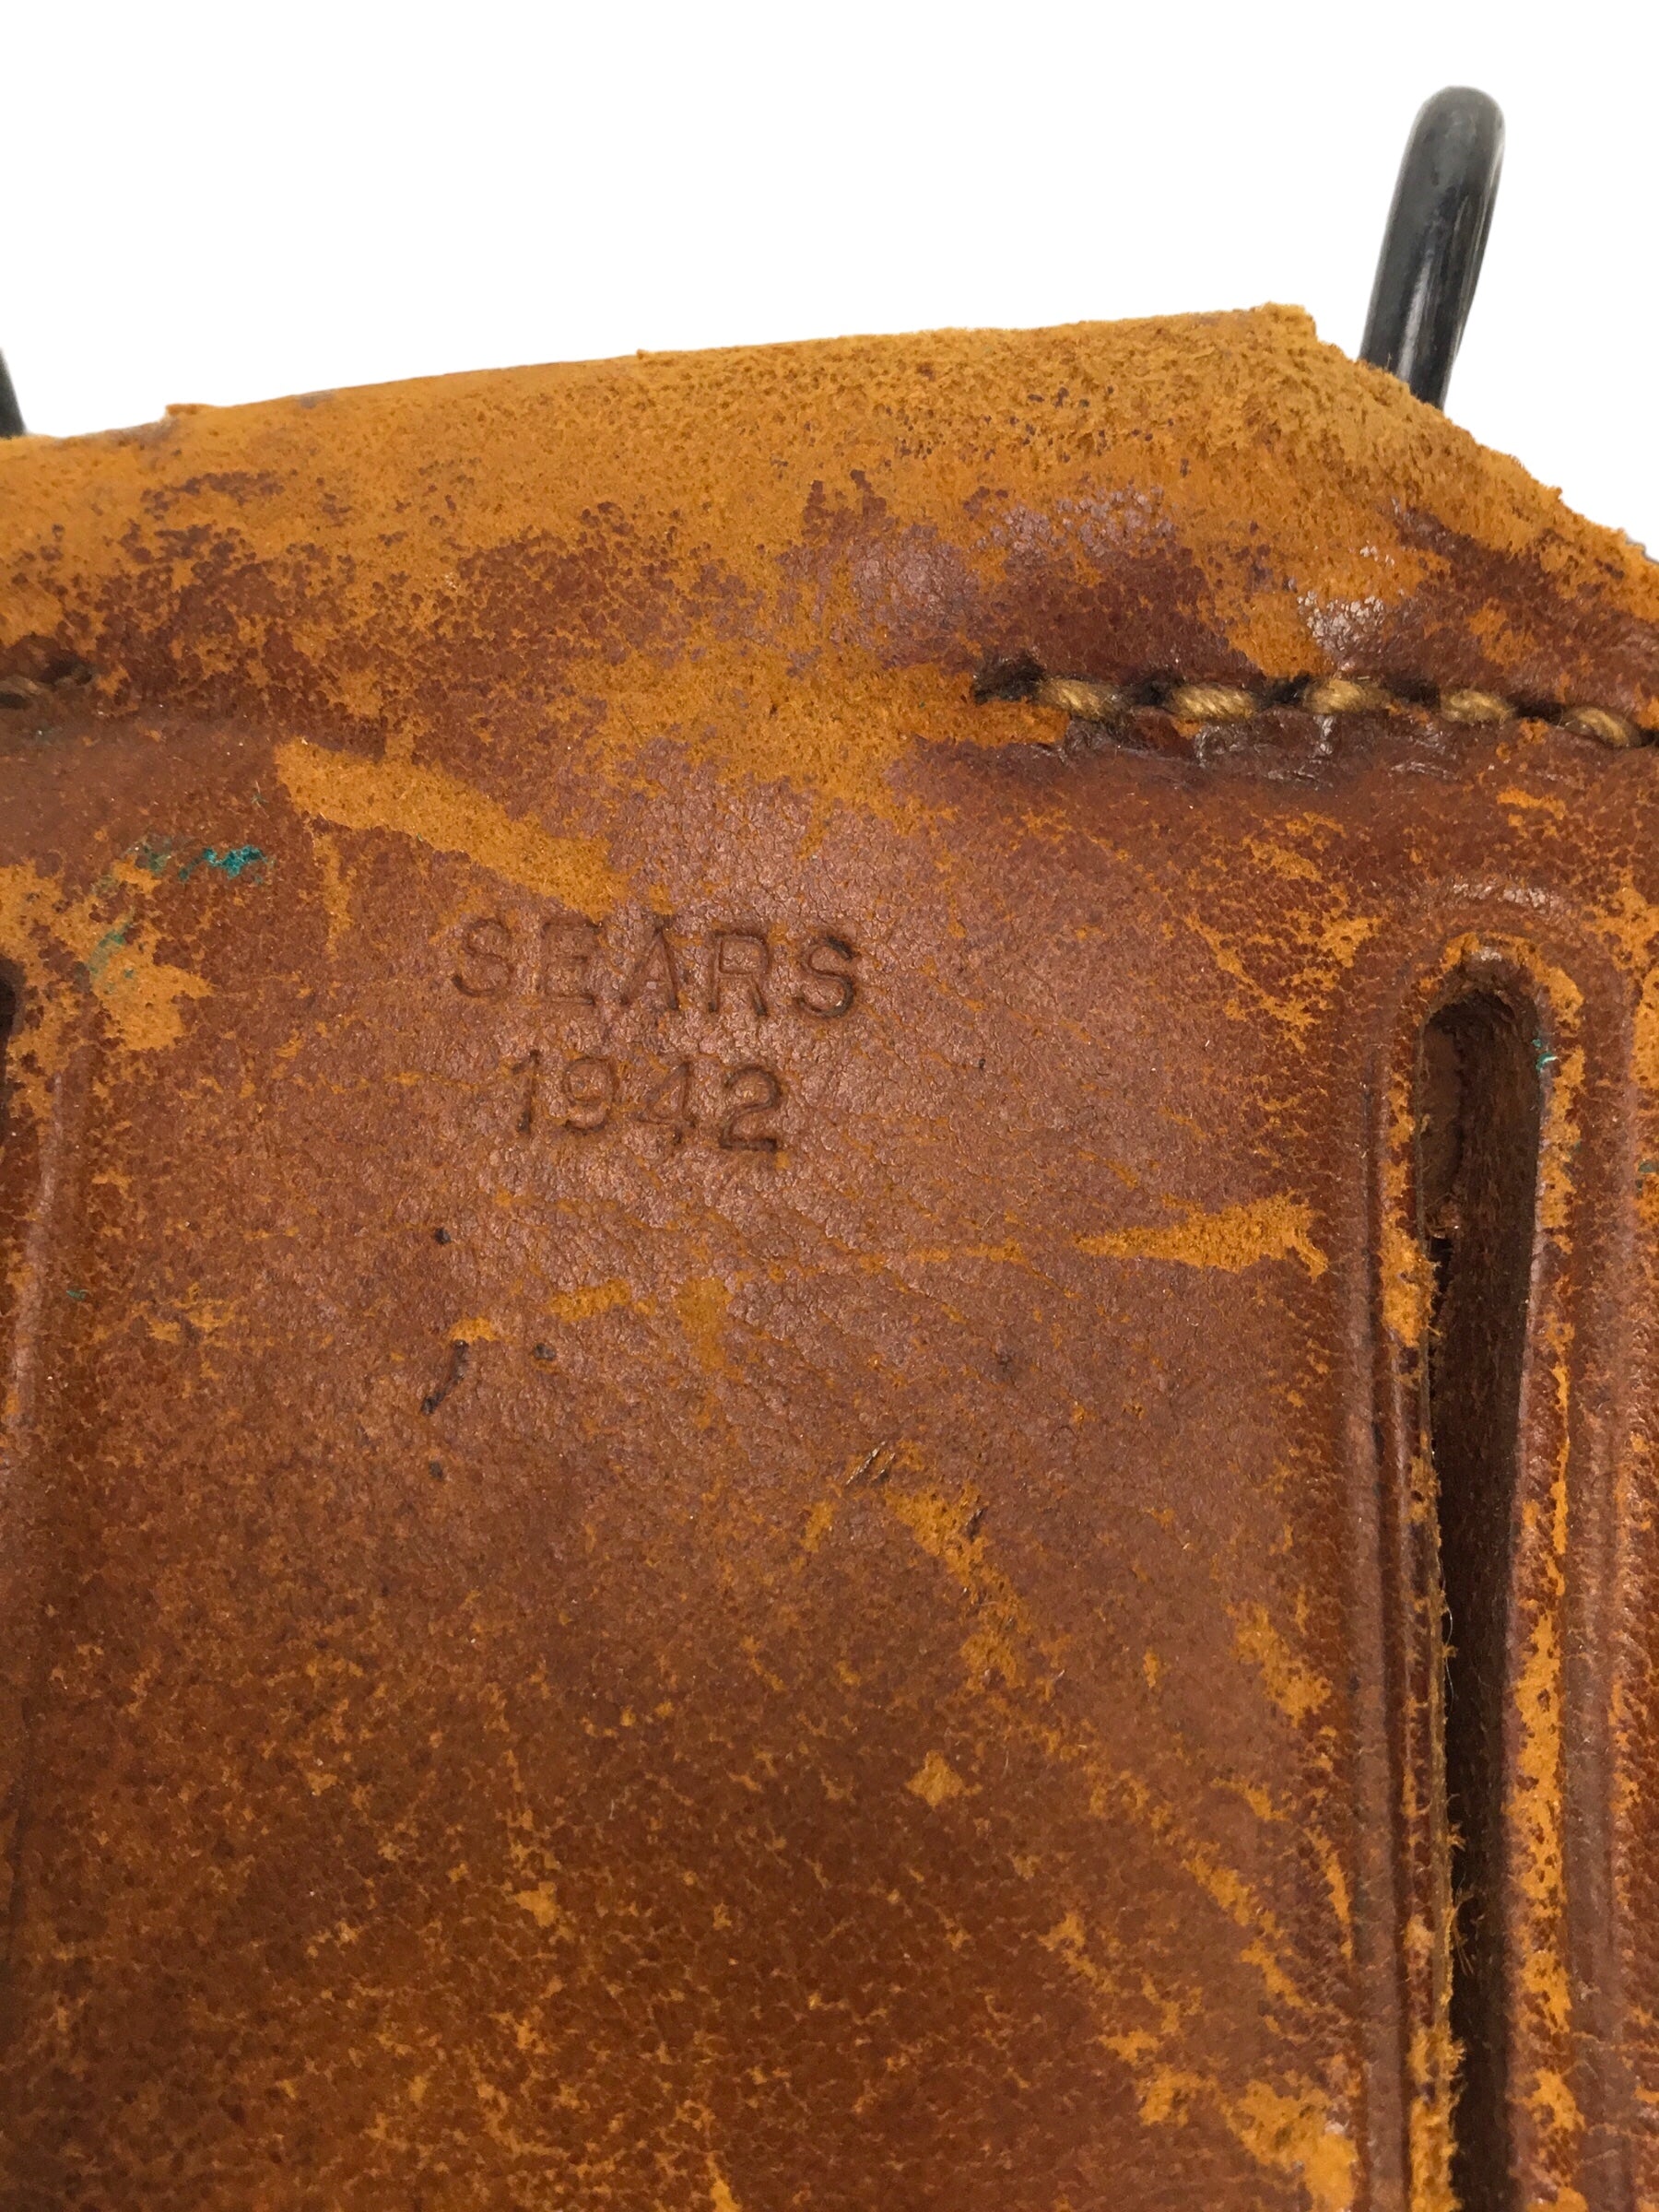 U.S. WWII leather pistol holster marked "U.S." on flap, further marked "Sears, 1942"